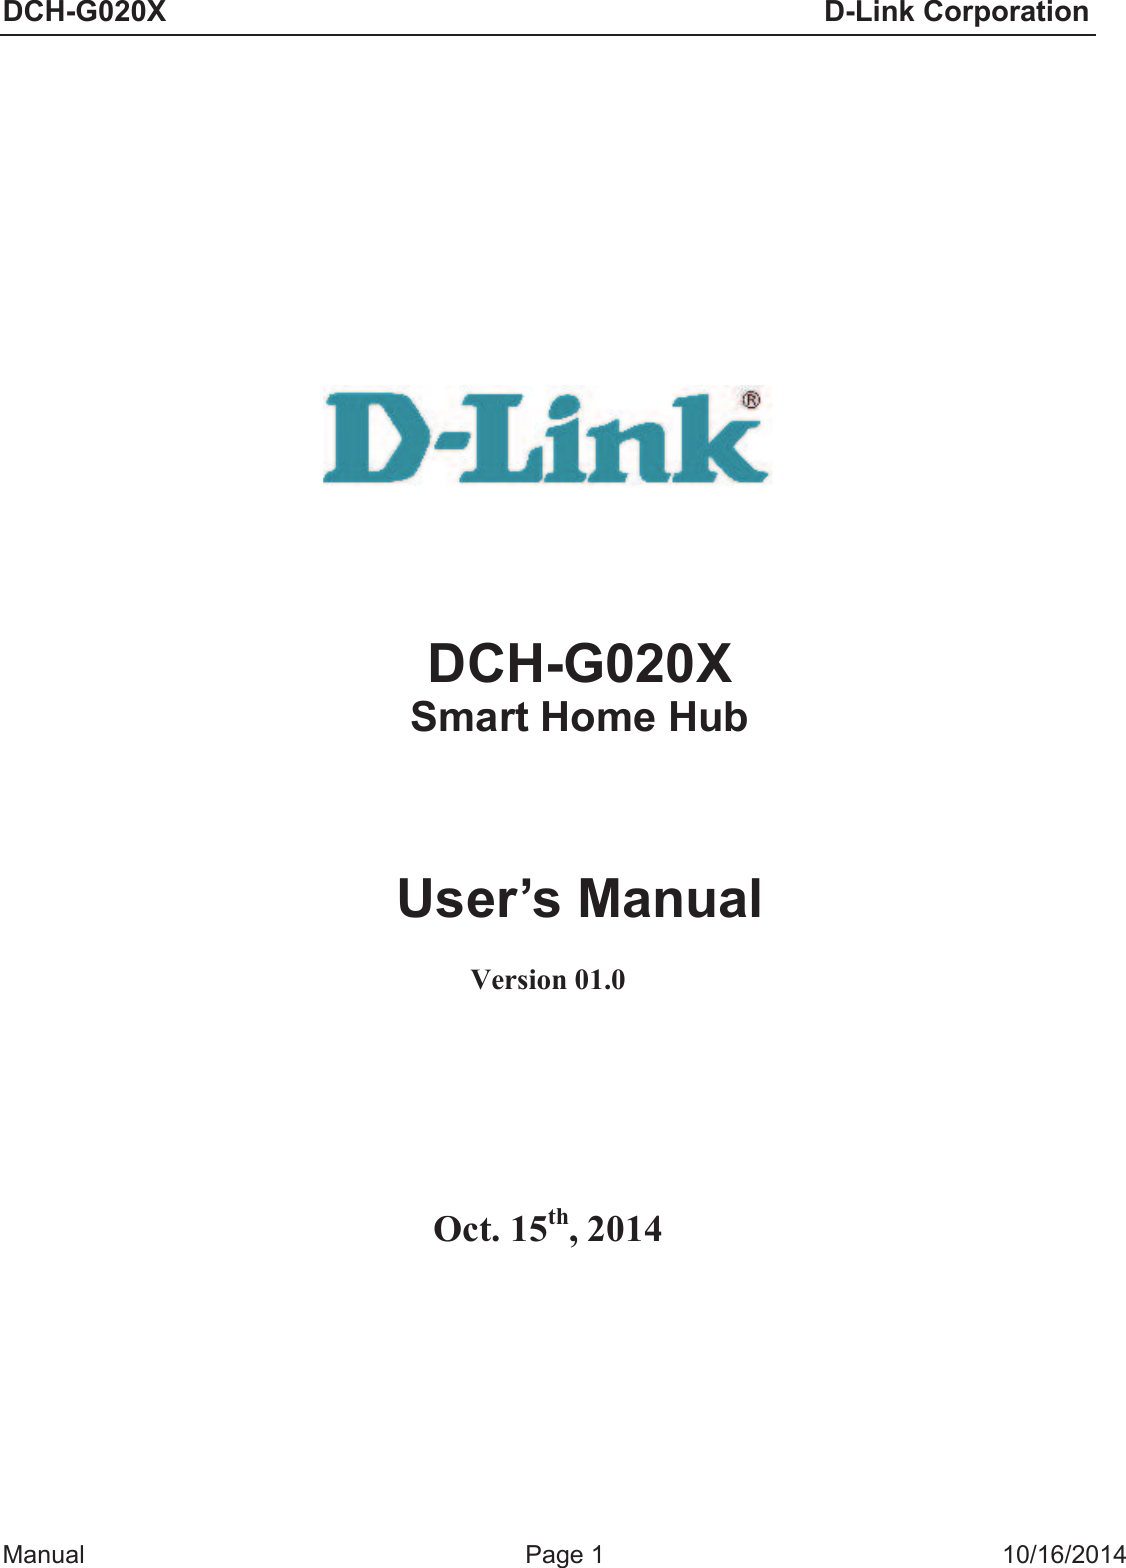 DCH-G02; D-Link CorporationManual  Page 1  10/16/2014 DCH-G020;6PDUW Home HubUser’s ManualVersion 01.0 Oct. 15th, 2014 